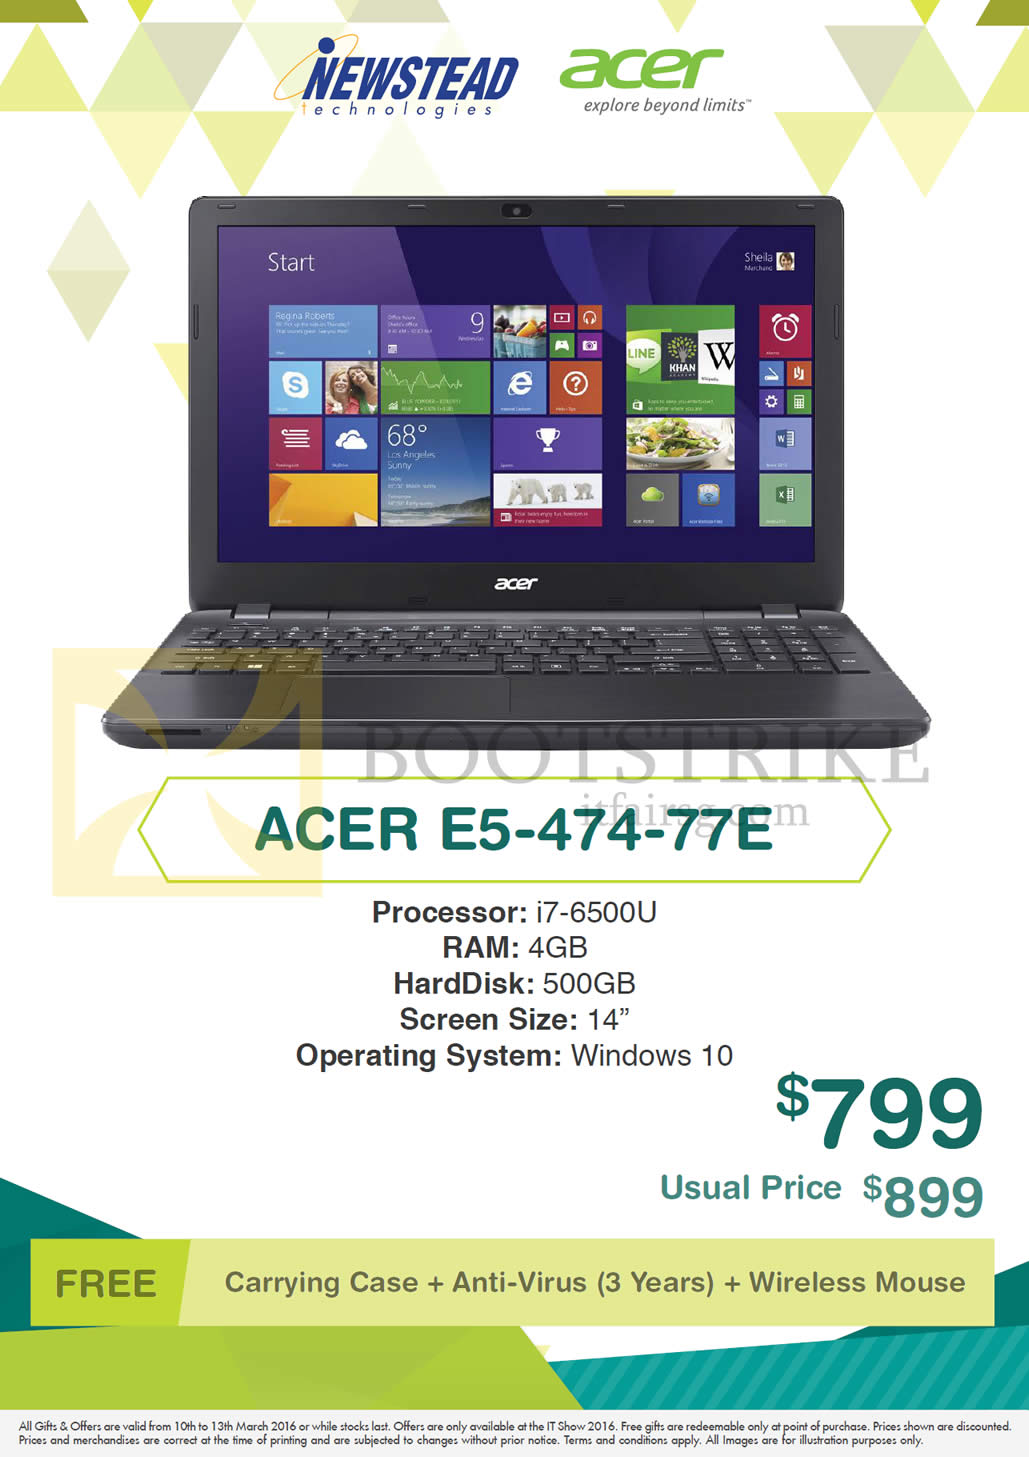 IT SHOW 2016 price list image brochure of Acer Newstead Notebook E5-474-77E